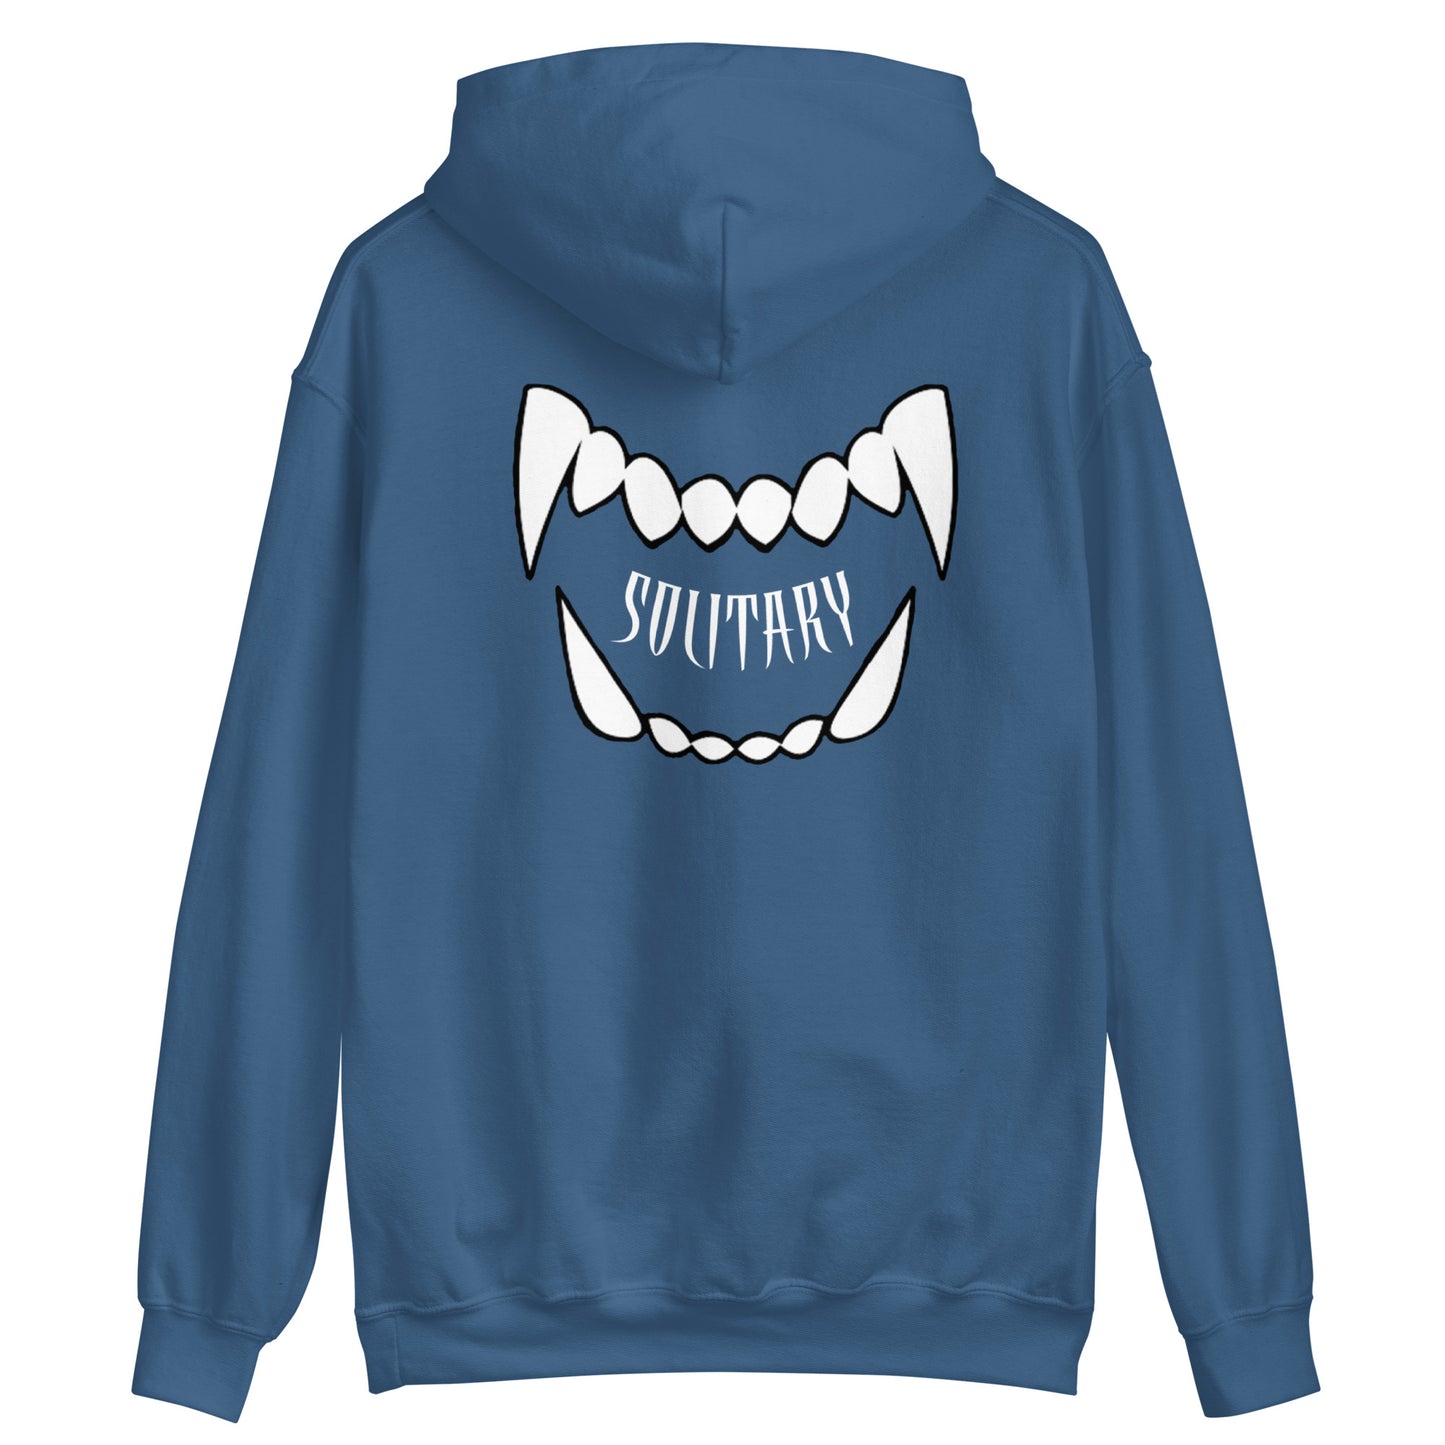 Fangs Embroidered Solitary Hoodie